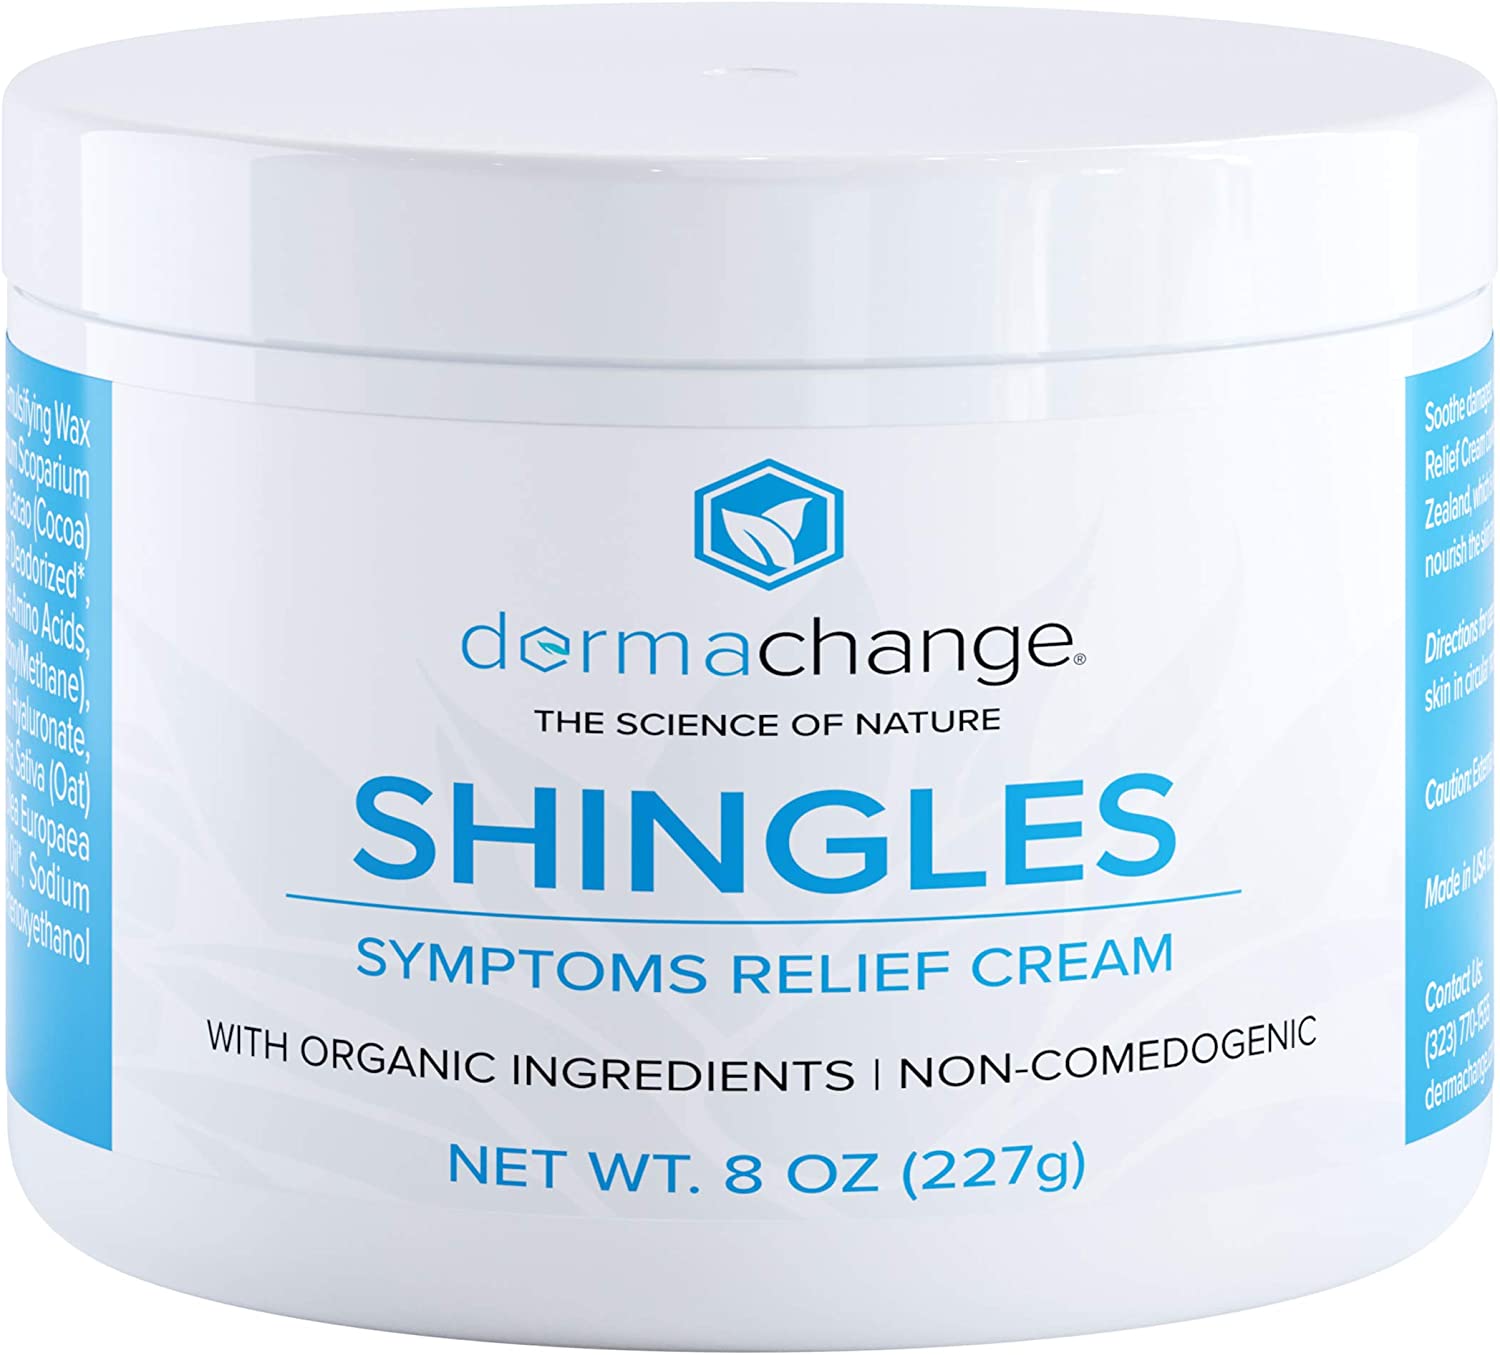 3 Best Treatments For Shingles – For The Elderly | Organic Shingles Pain Relief Cream